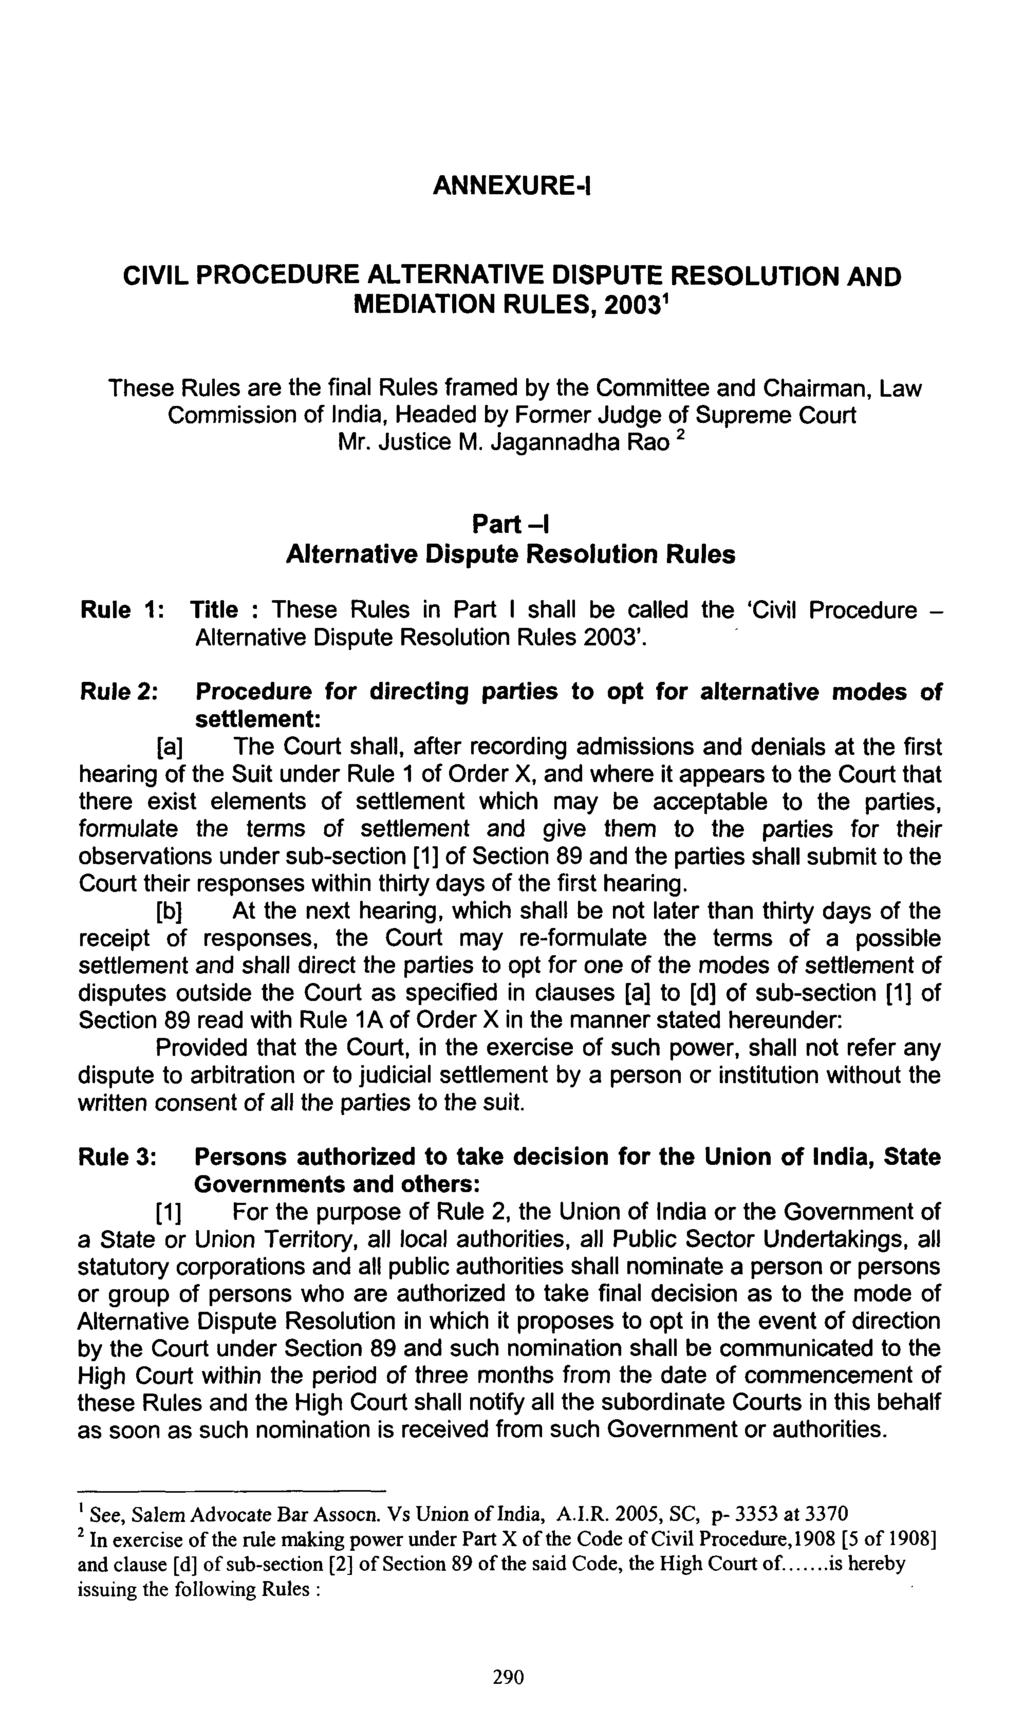 ANNEXURE-I CIVIL PROCEDURE ALTERNATIVE DISPUTE RESOLUTION AND MEDIATION RULES, 2003' These Rules are the final Rules framed by the Committee and Chairman, Law Commission of India, Headed by Former